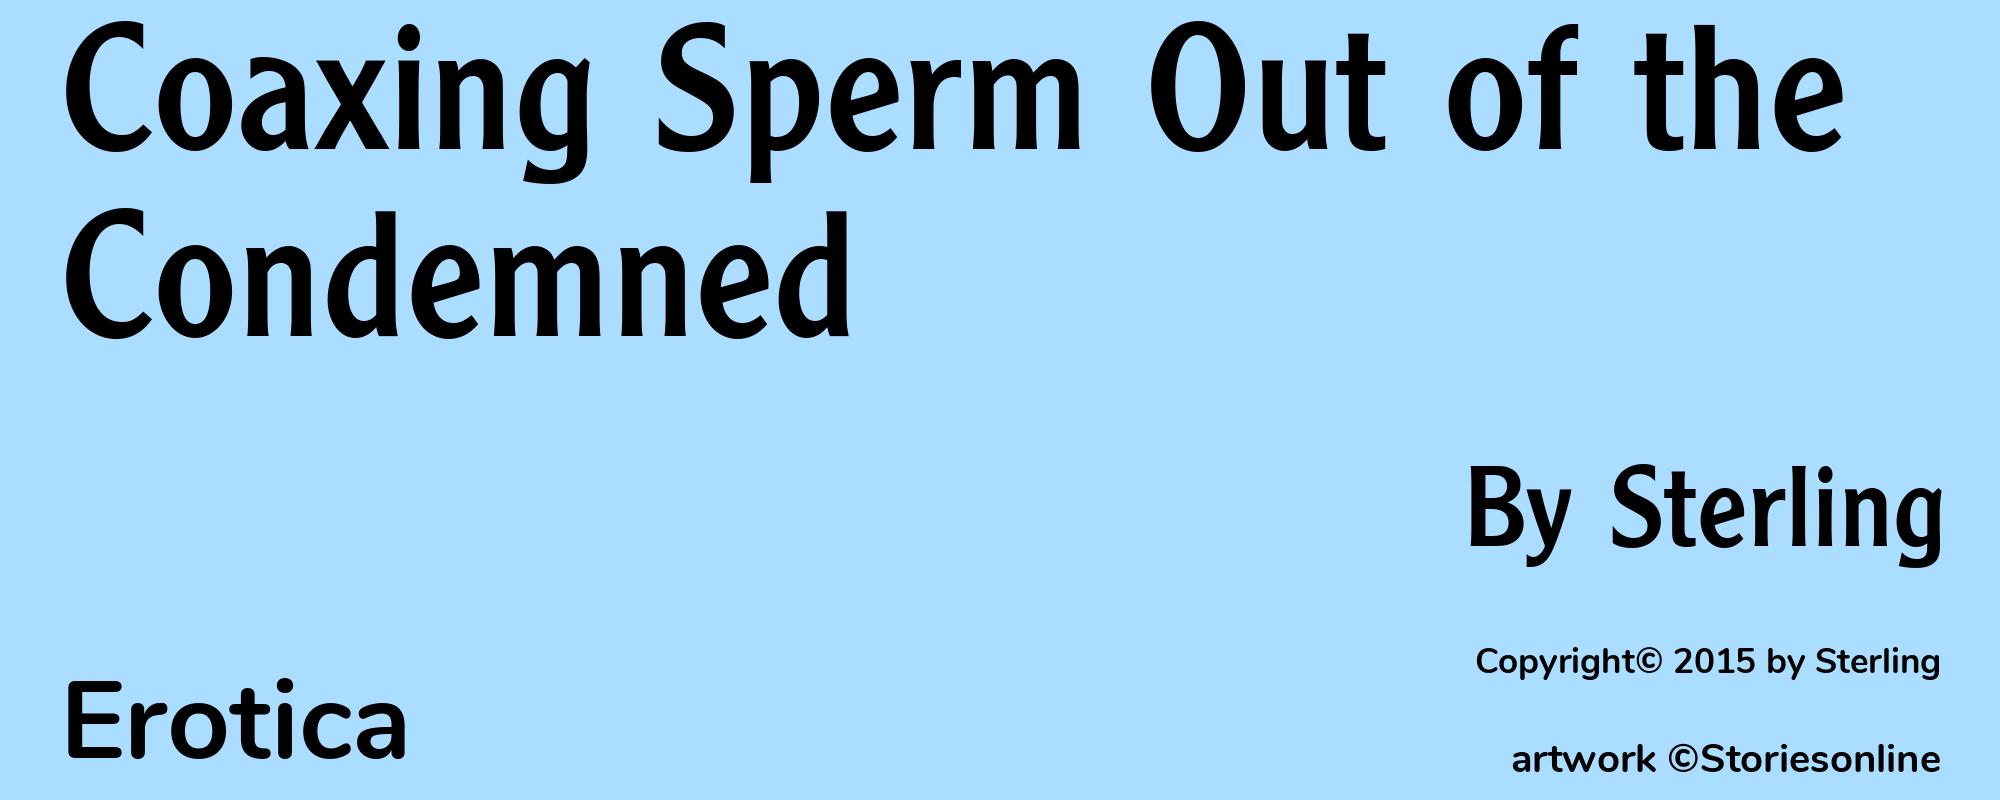 Coaxing Sperm Out of the Condemned - Cover